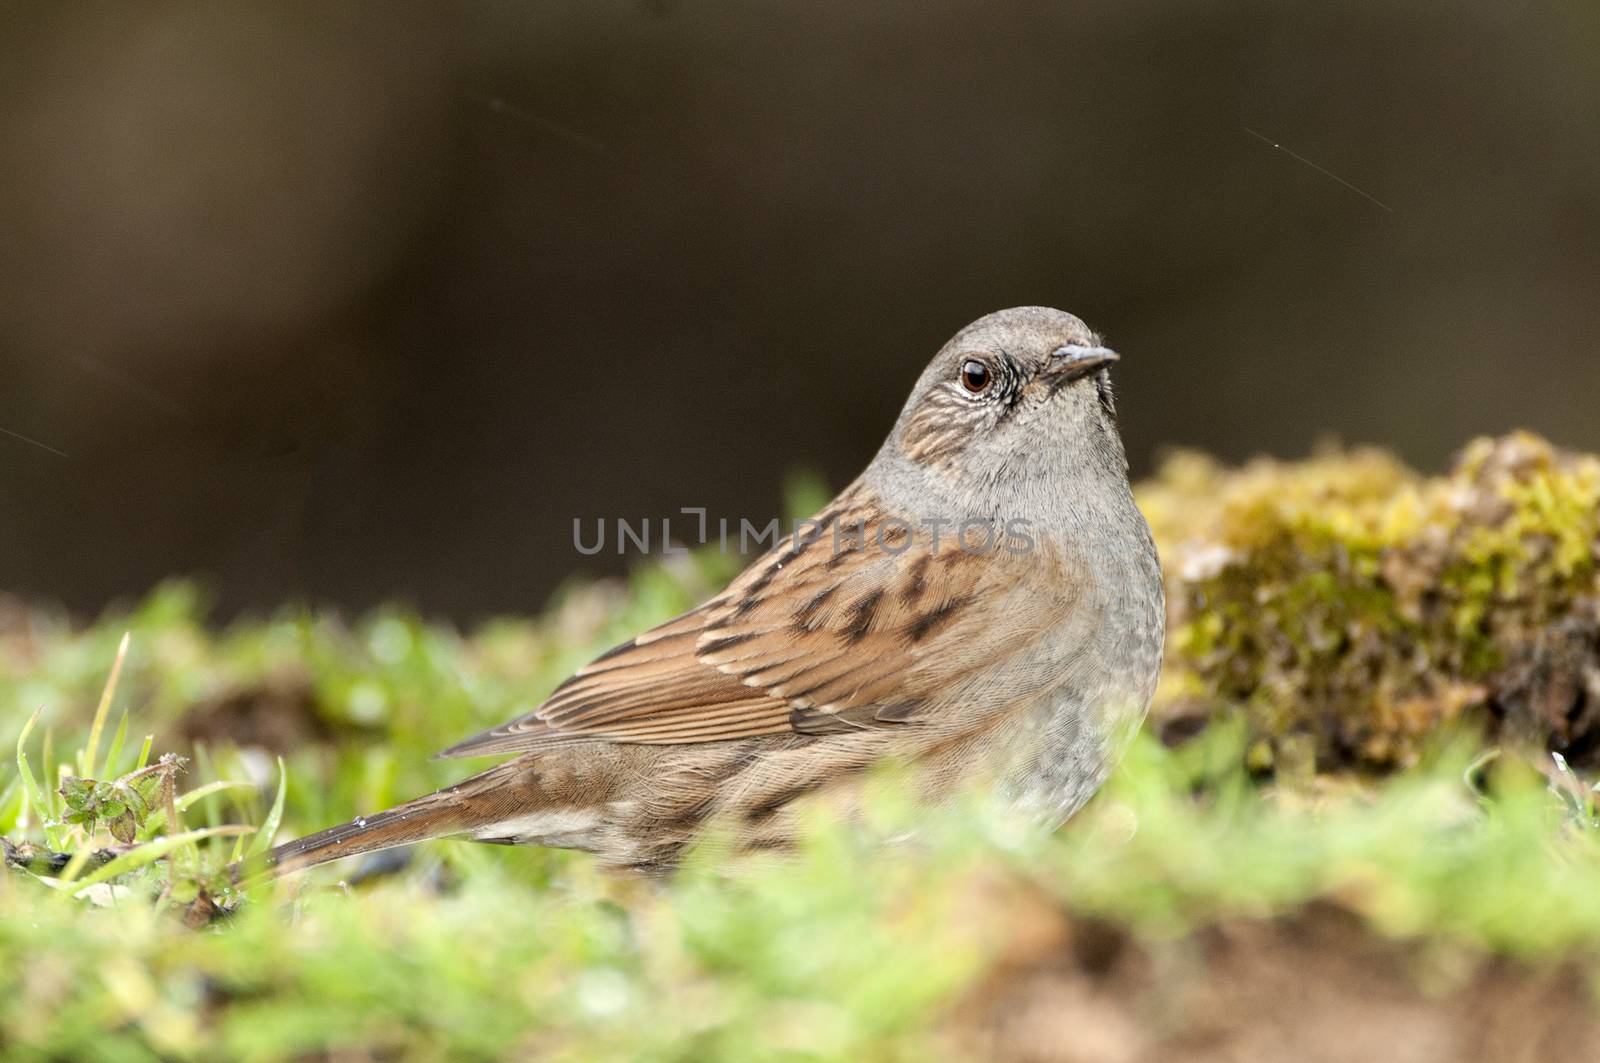 Dunnock (Prunella modularis), Looking for food in the field  by jalonsohu@gmail.com